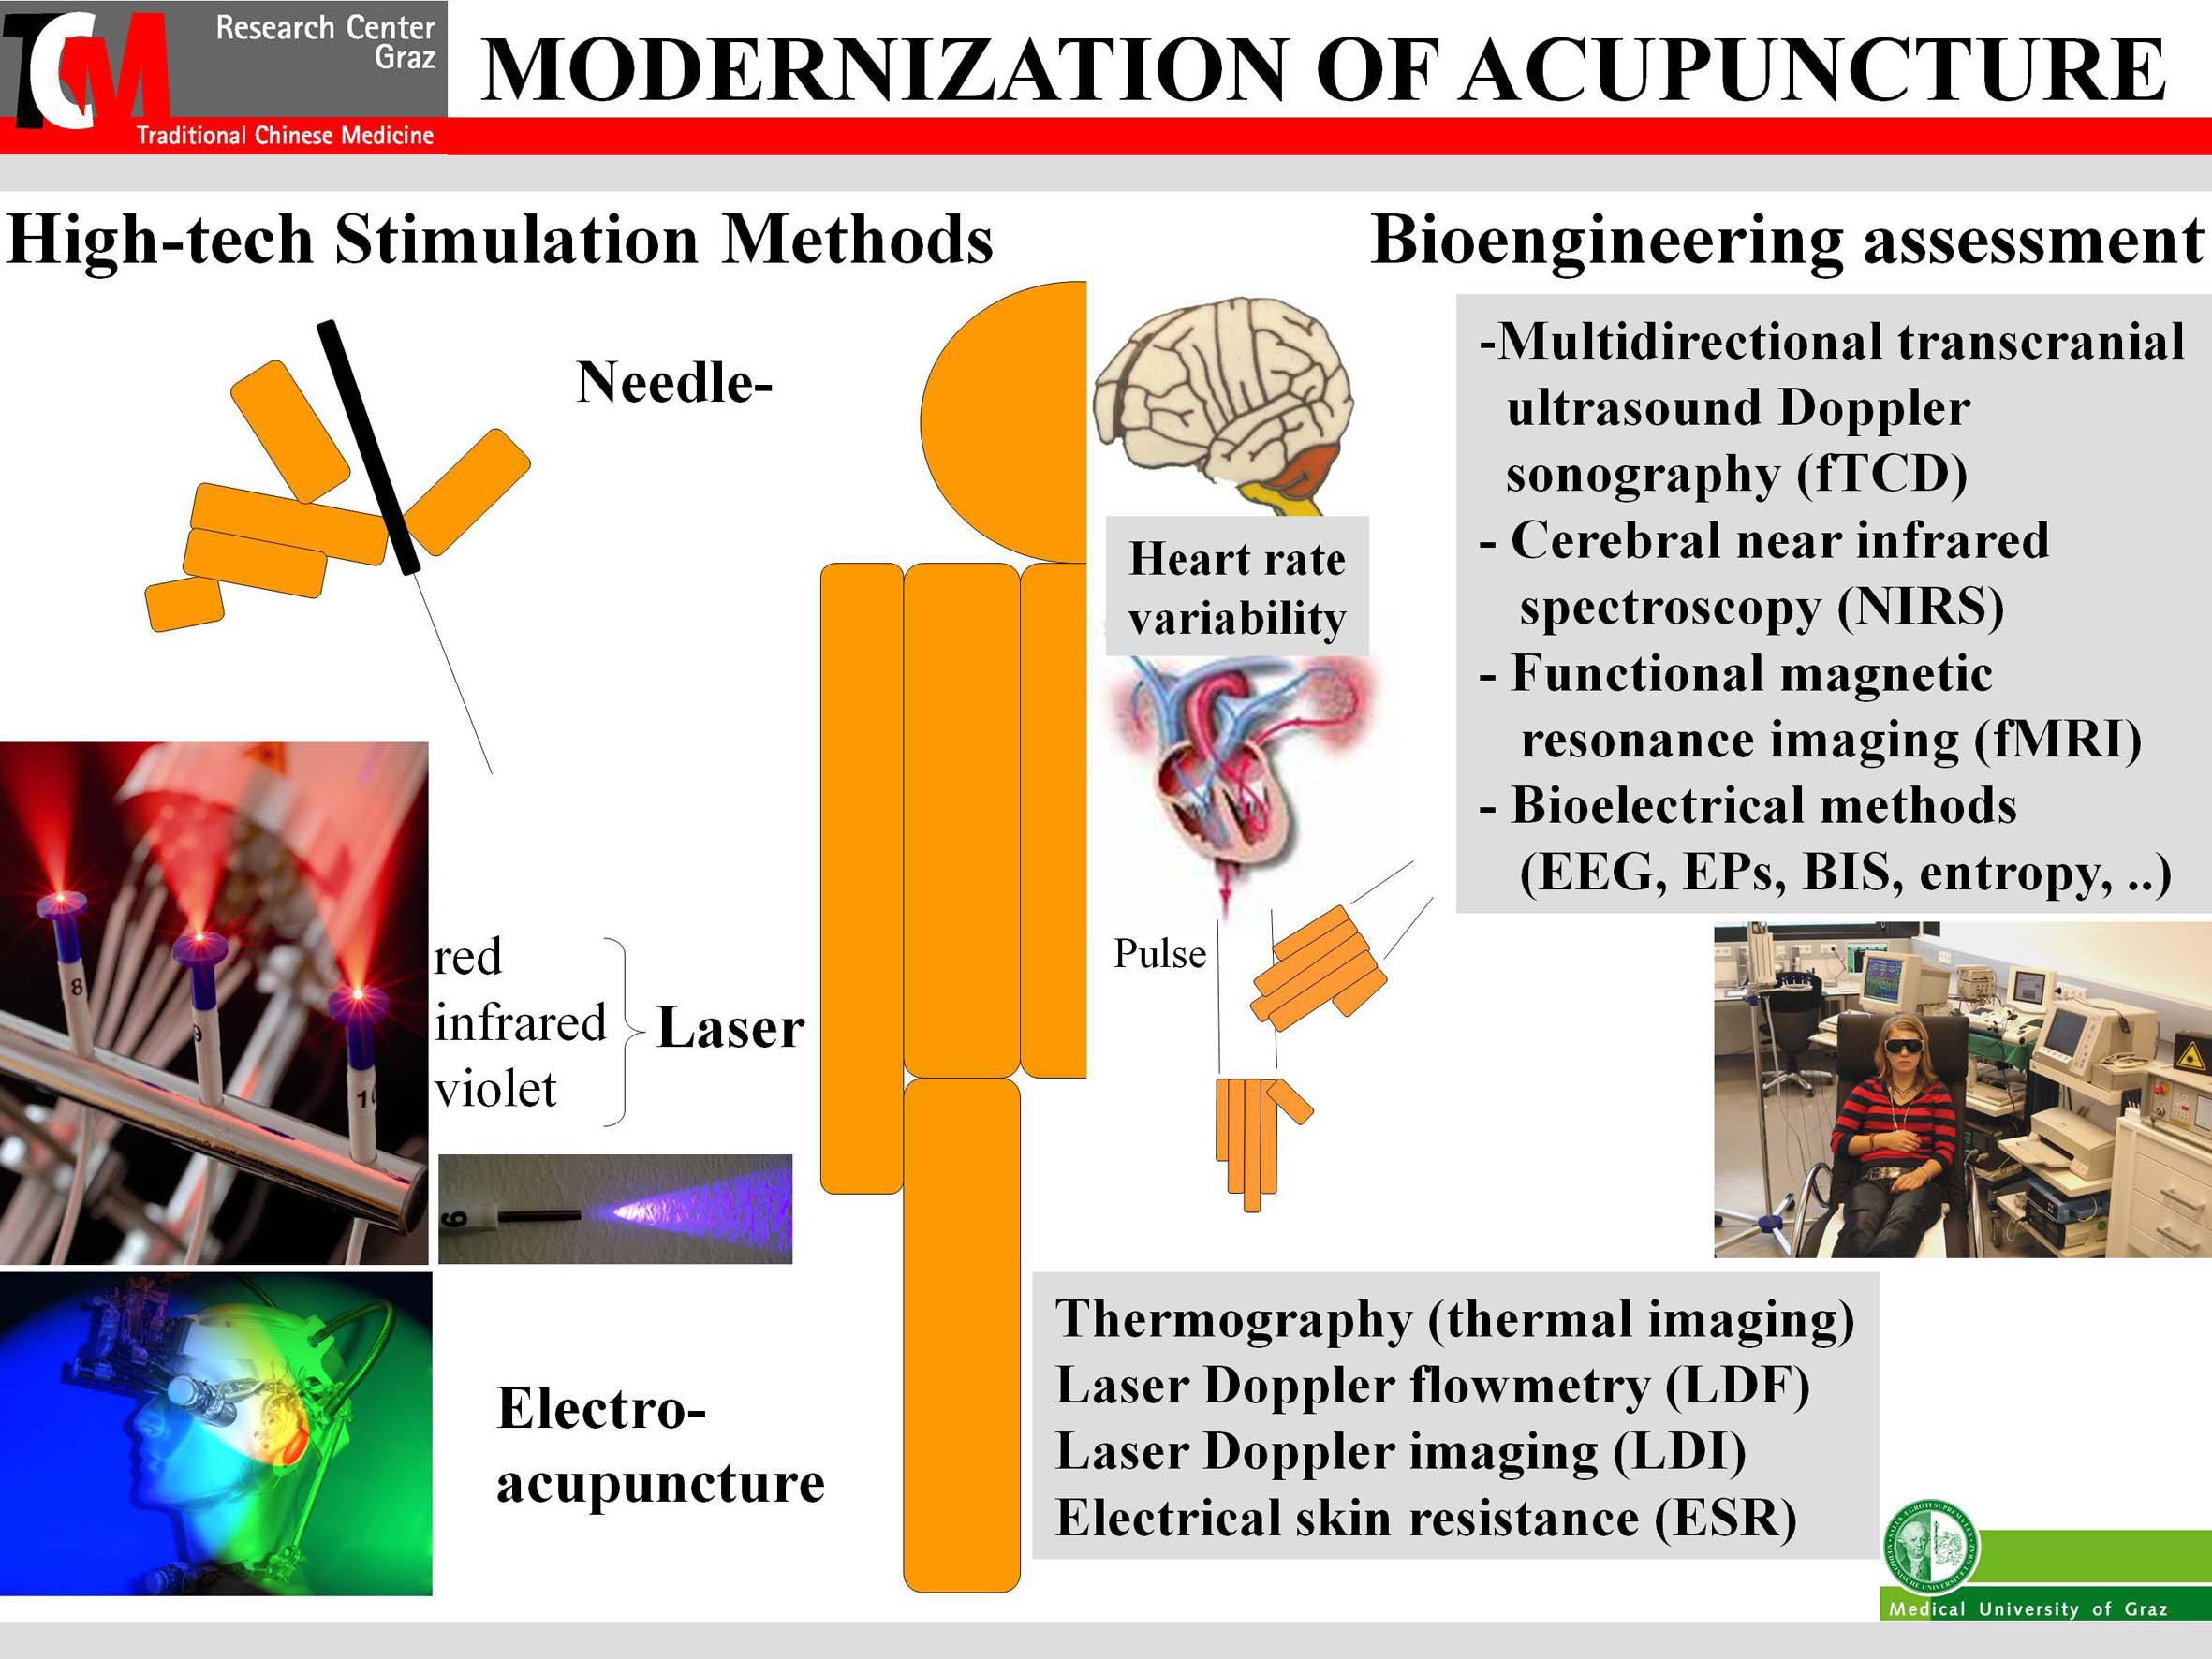 Spectrum of methods for high-tech acupuncture research at the Medical University of Graz (modified from [15]).